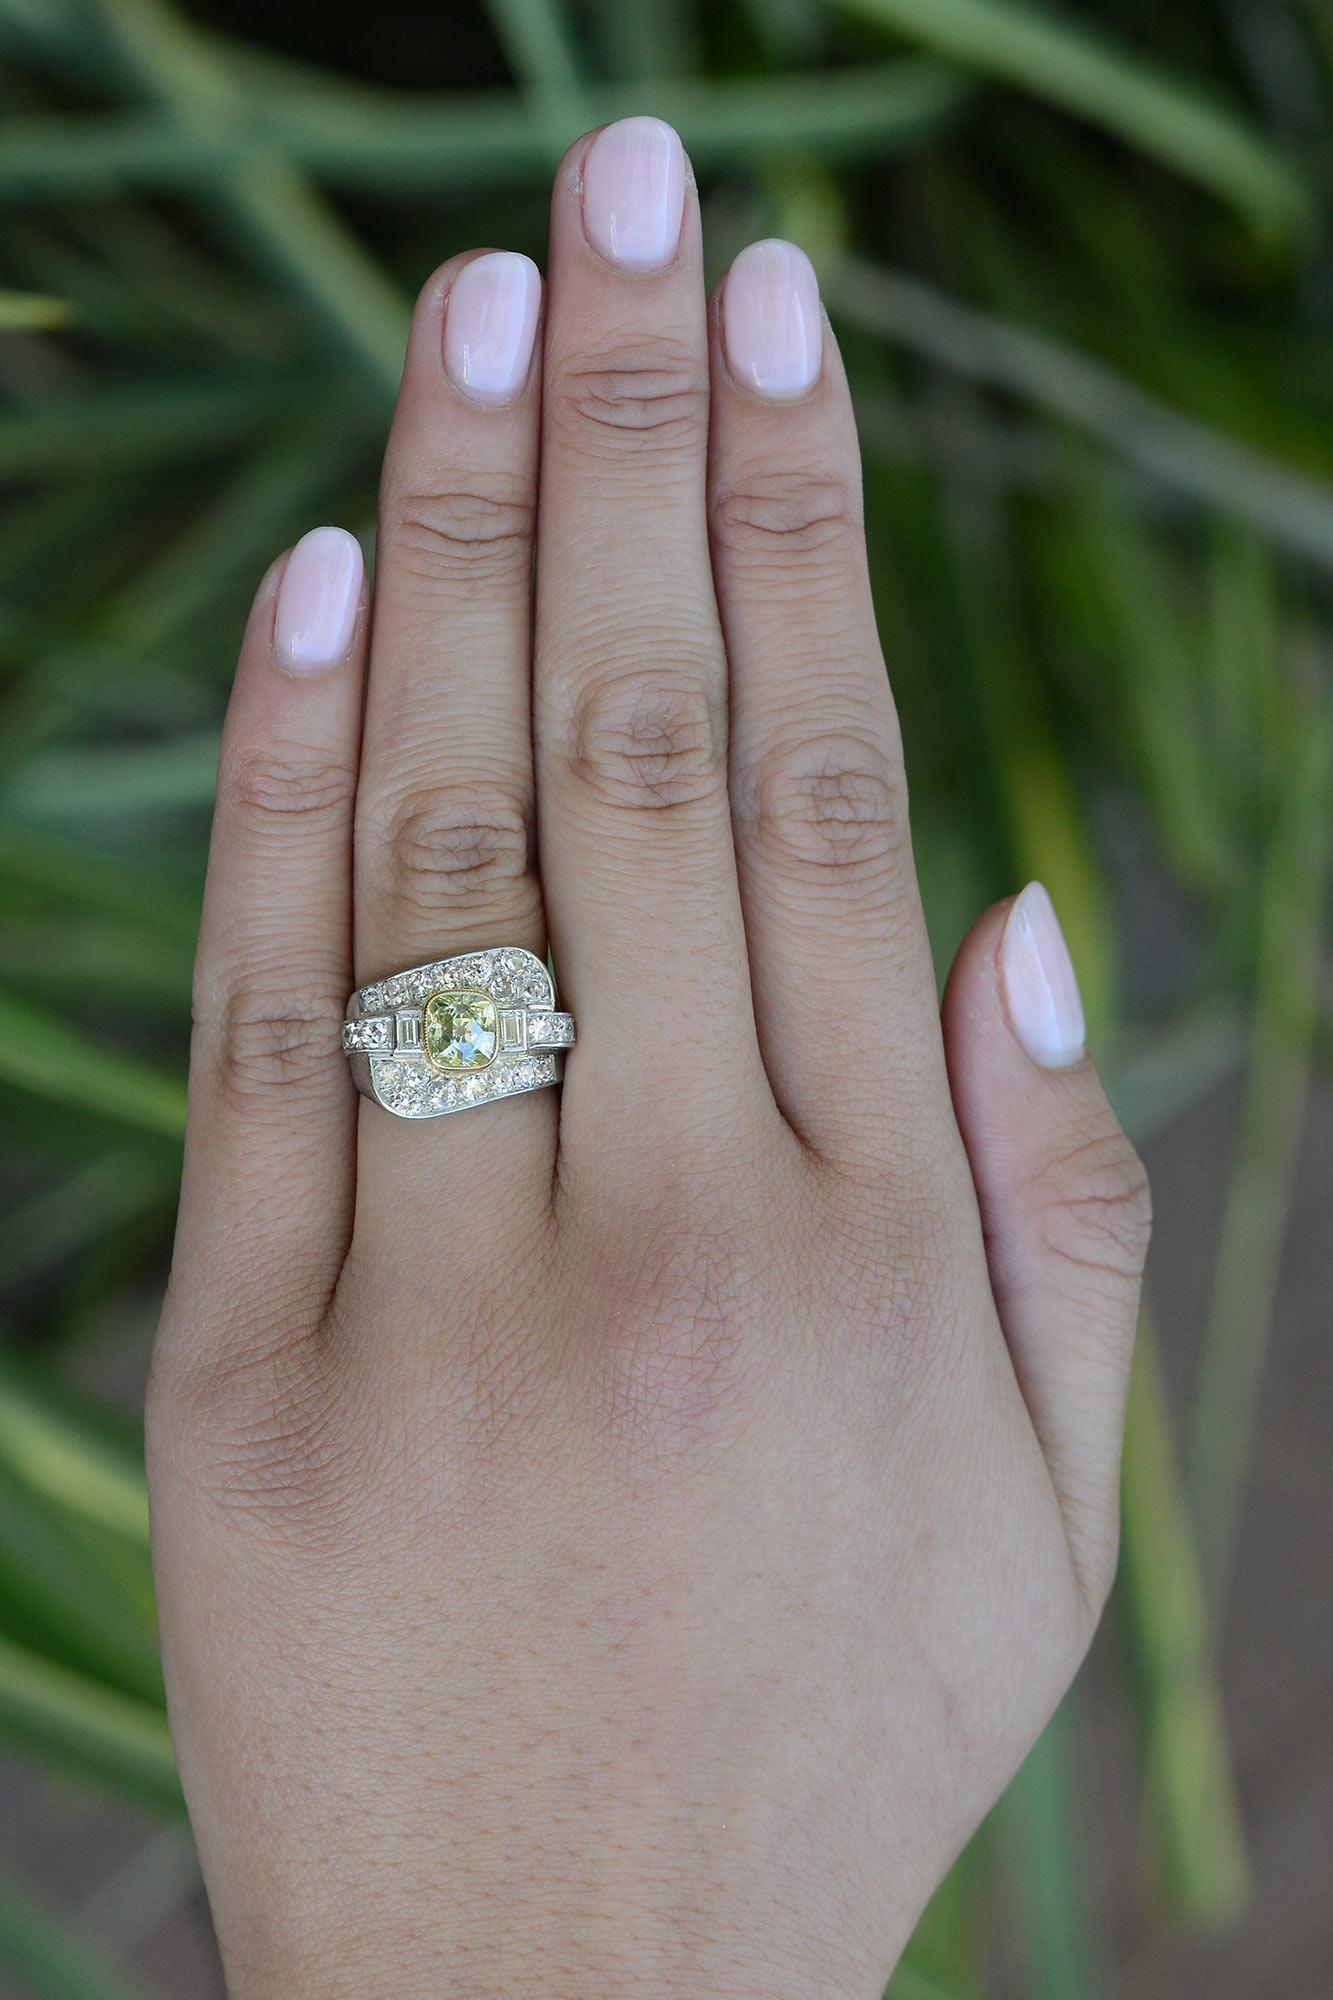 Nothing compares to an Art Deco engagement ring. Asymmetrical, curvaceous lines are shown throughout studded with shimmering old cut diamonds. At the center is a 1.42 carat old mine cushion diamond with a captivating, yellowish green with chunky,